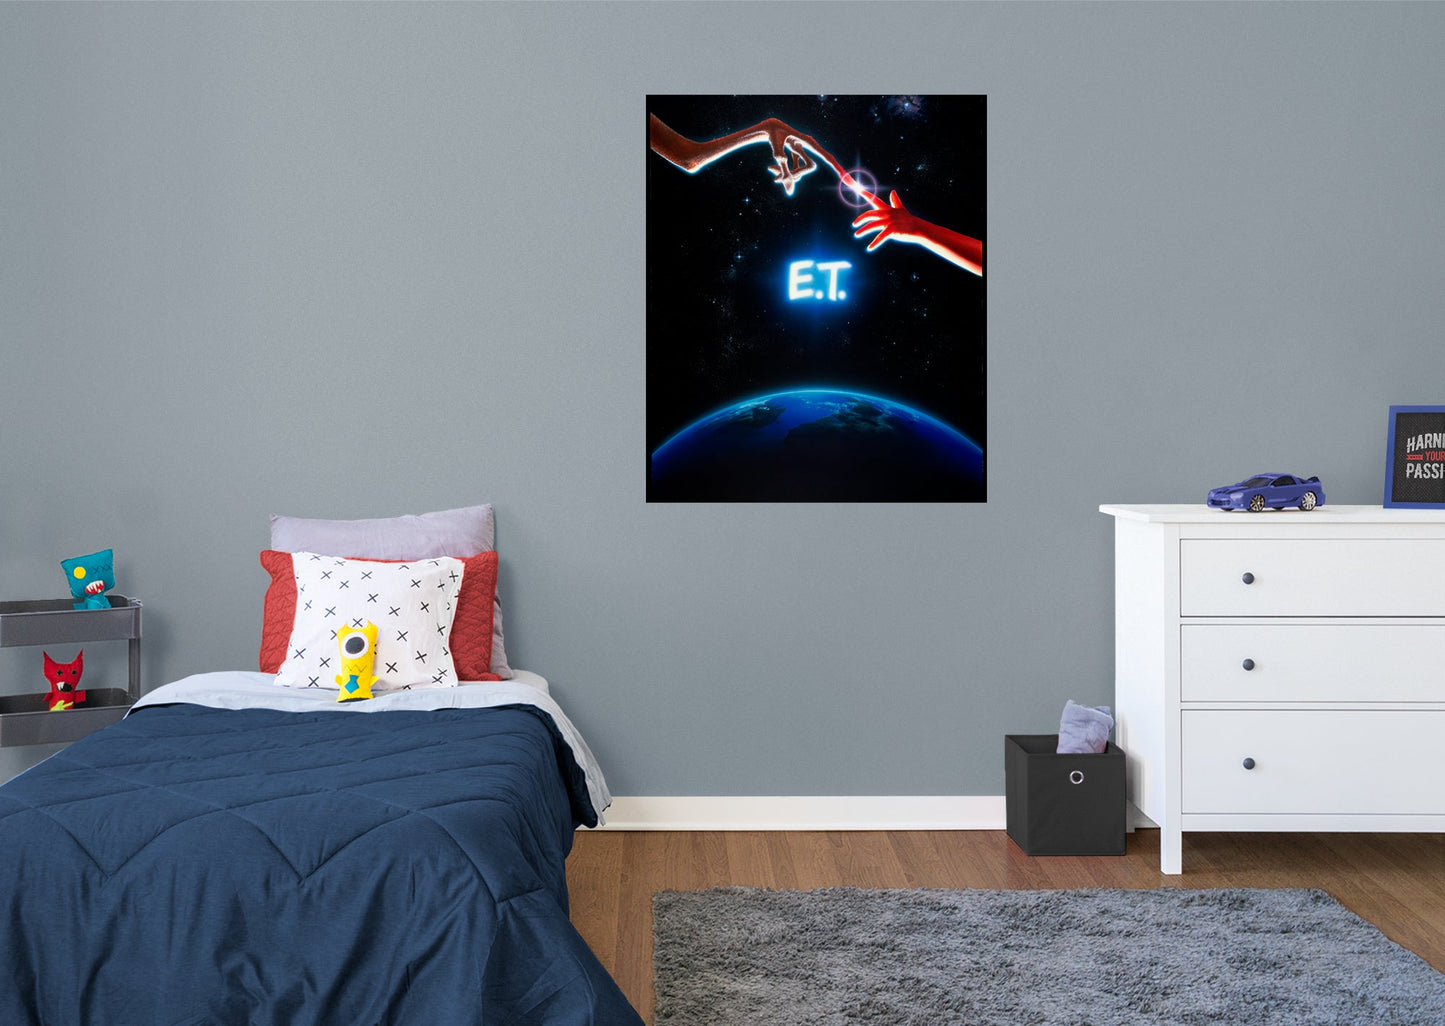 E.T.:  Hands Movie Poster Mural        - Officially Licensed NBC Universal Removable Wall   Adhesive Decal